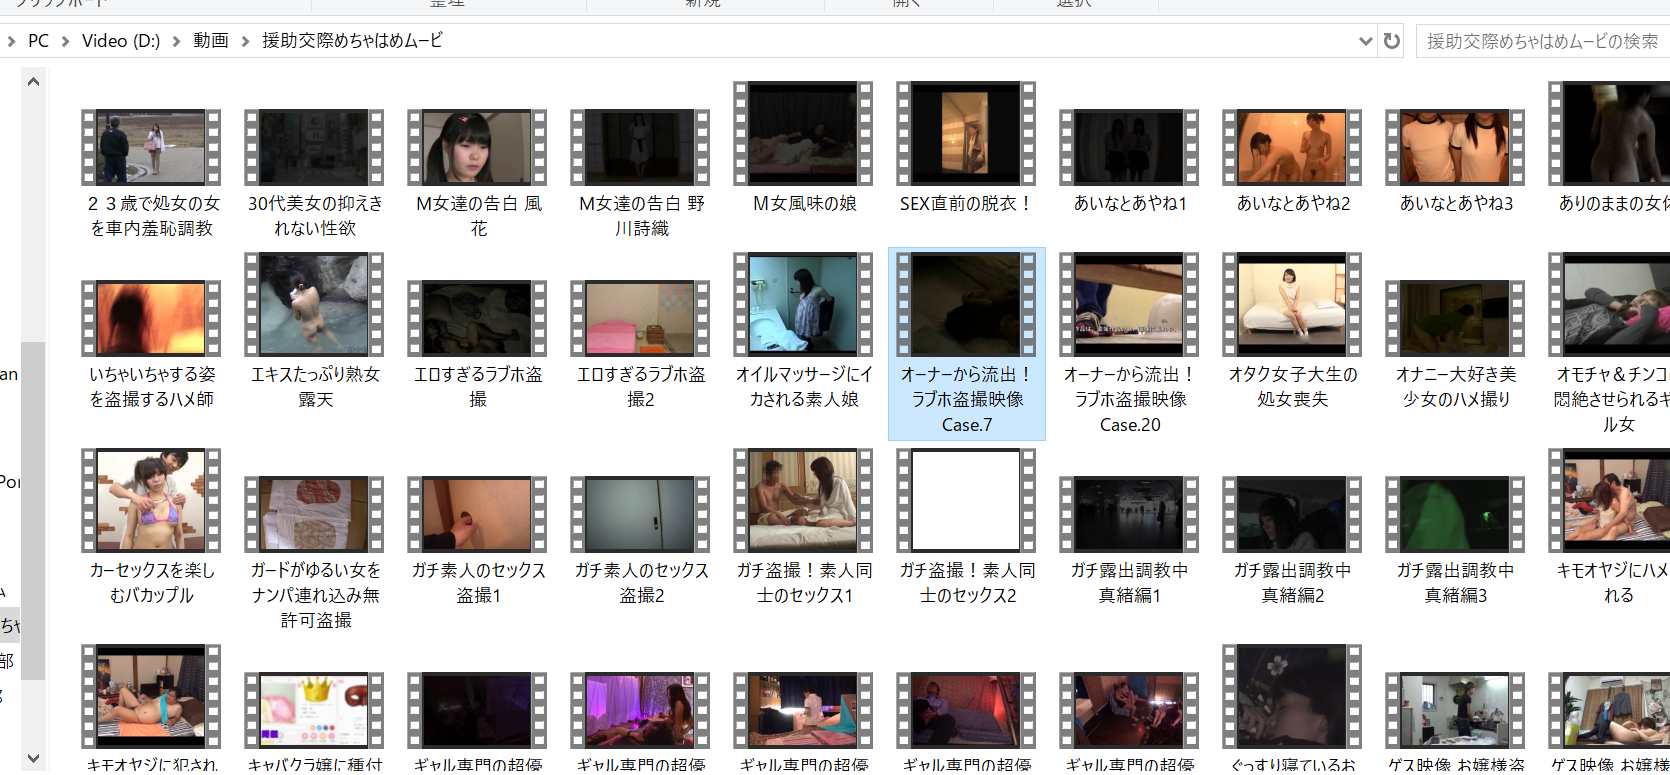 some of the uncensored JAV erotic videos that I downloaded when I was a member of the Enkou55